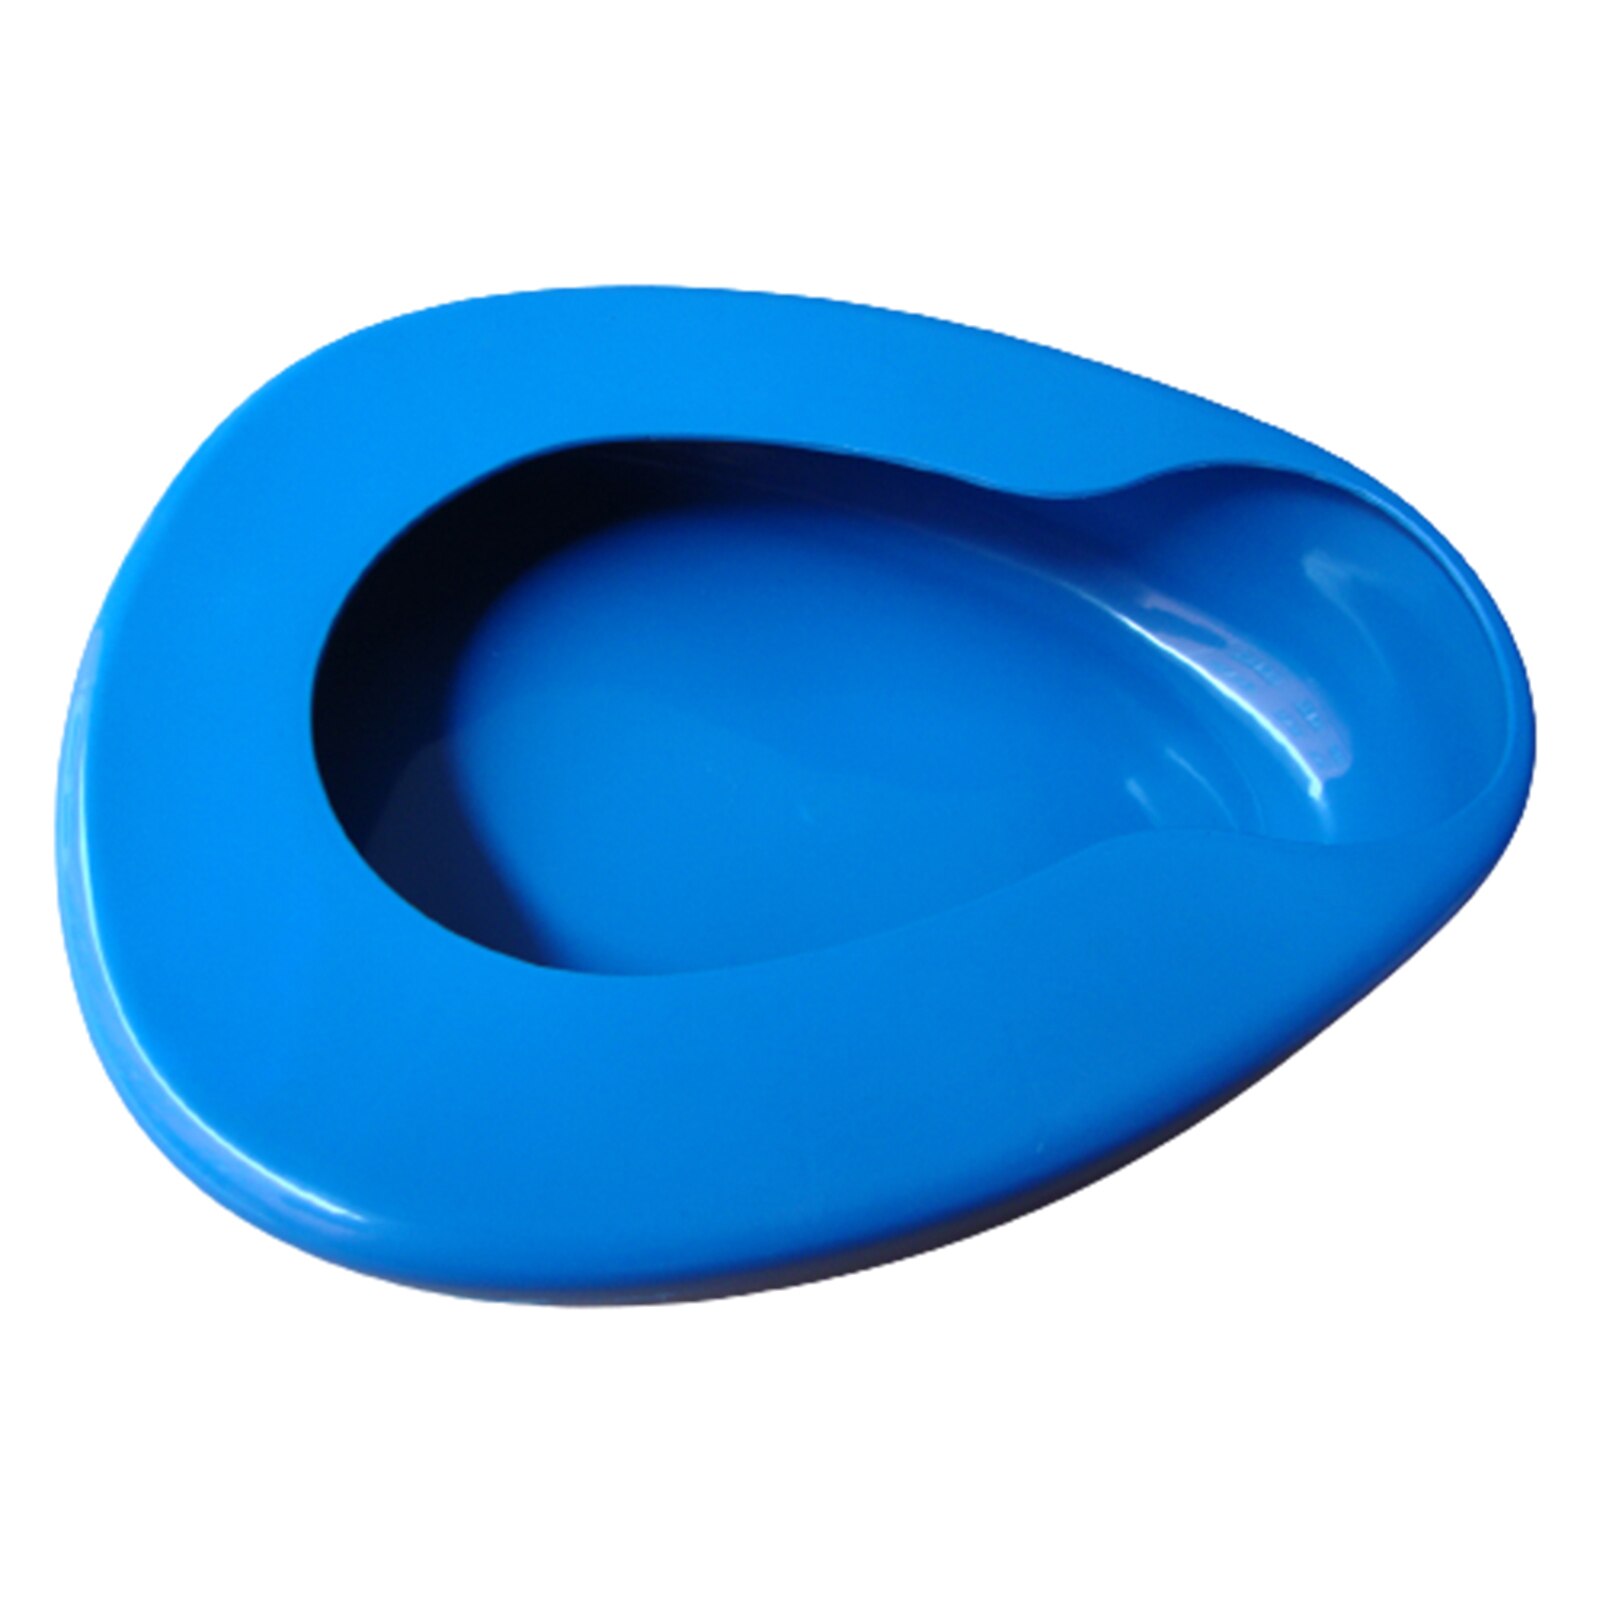 Smooth Bedpan Seat Urinal Unisex Potty for Elderly Daily Use in Bed, Chair or Wheelchair,Durable PP Material